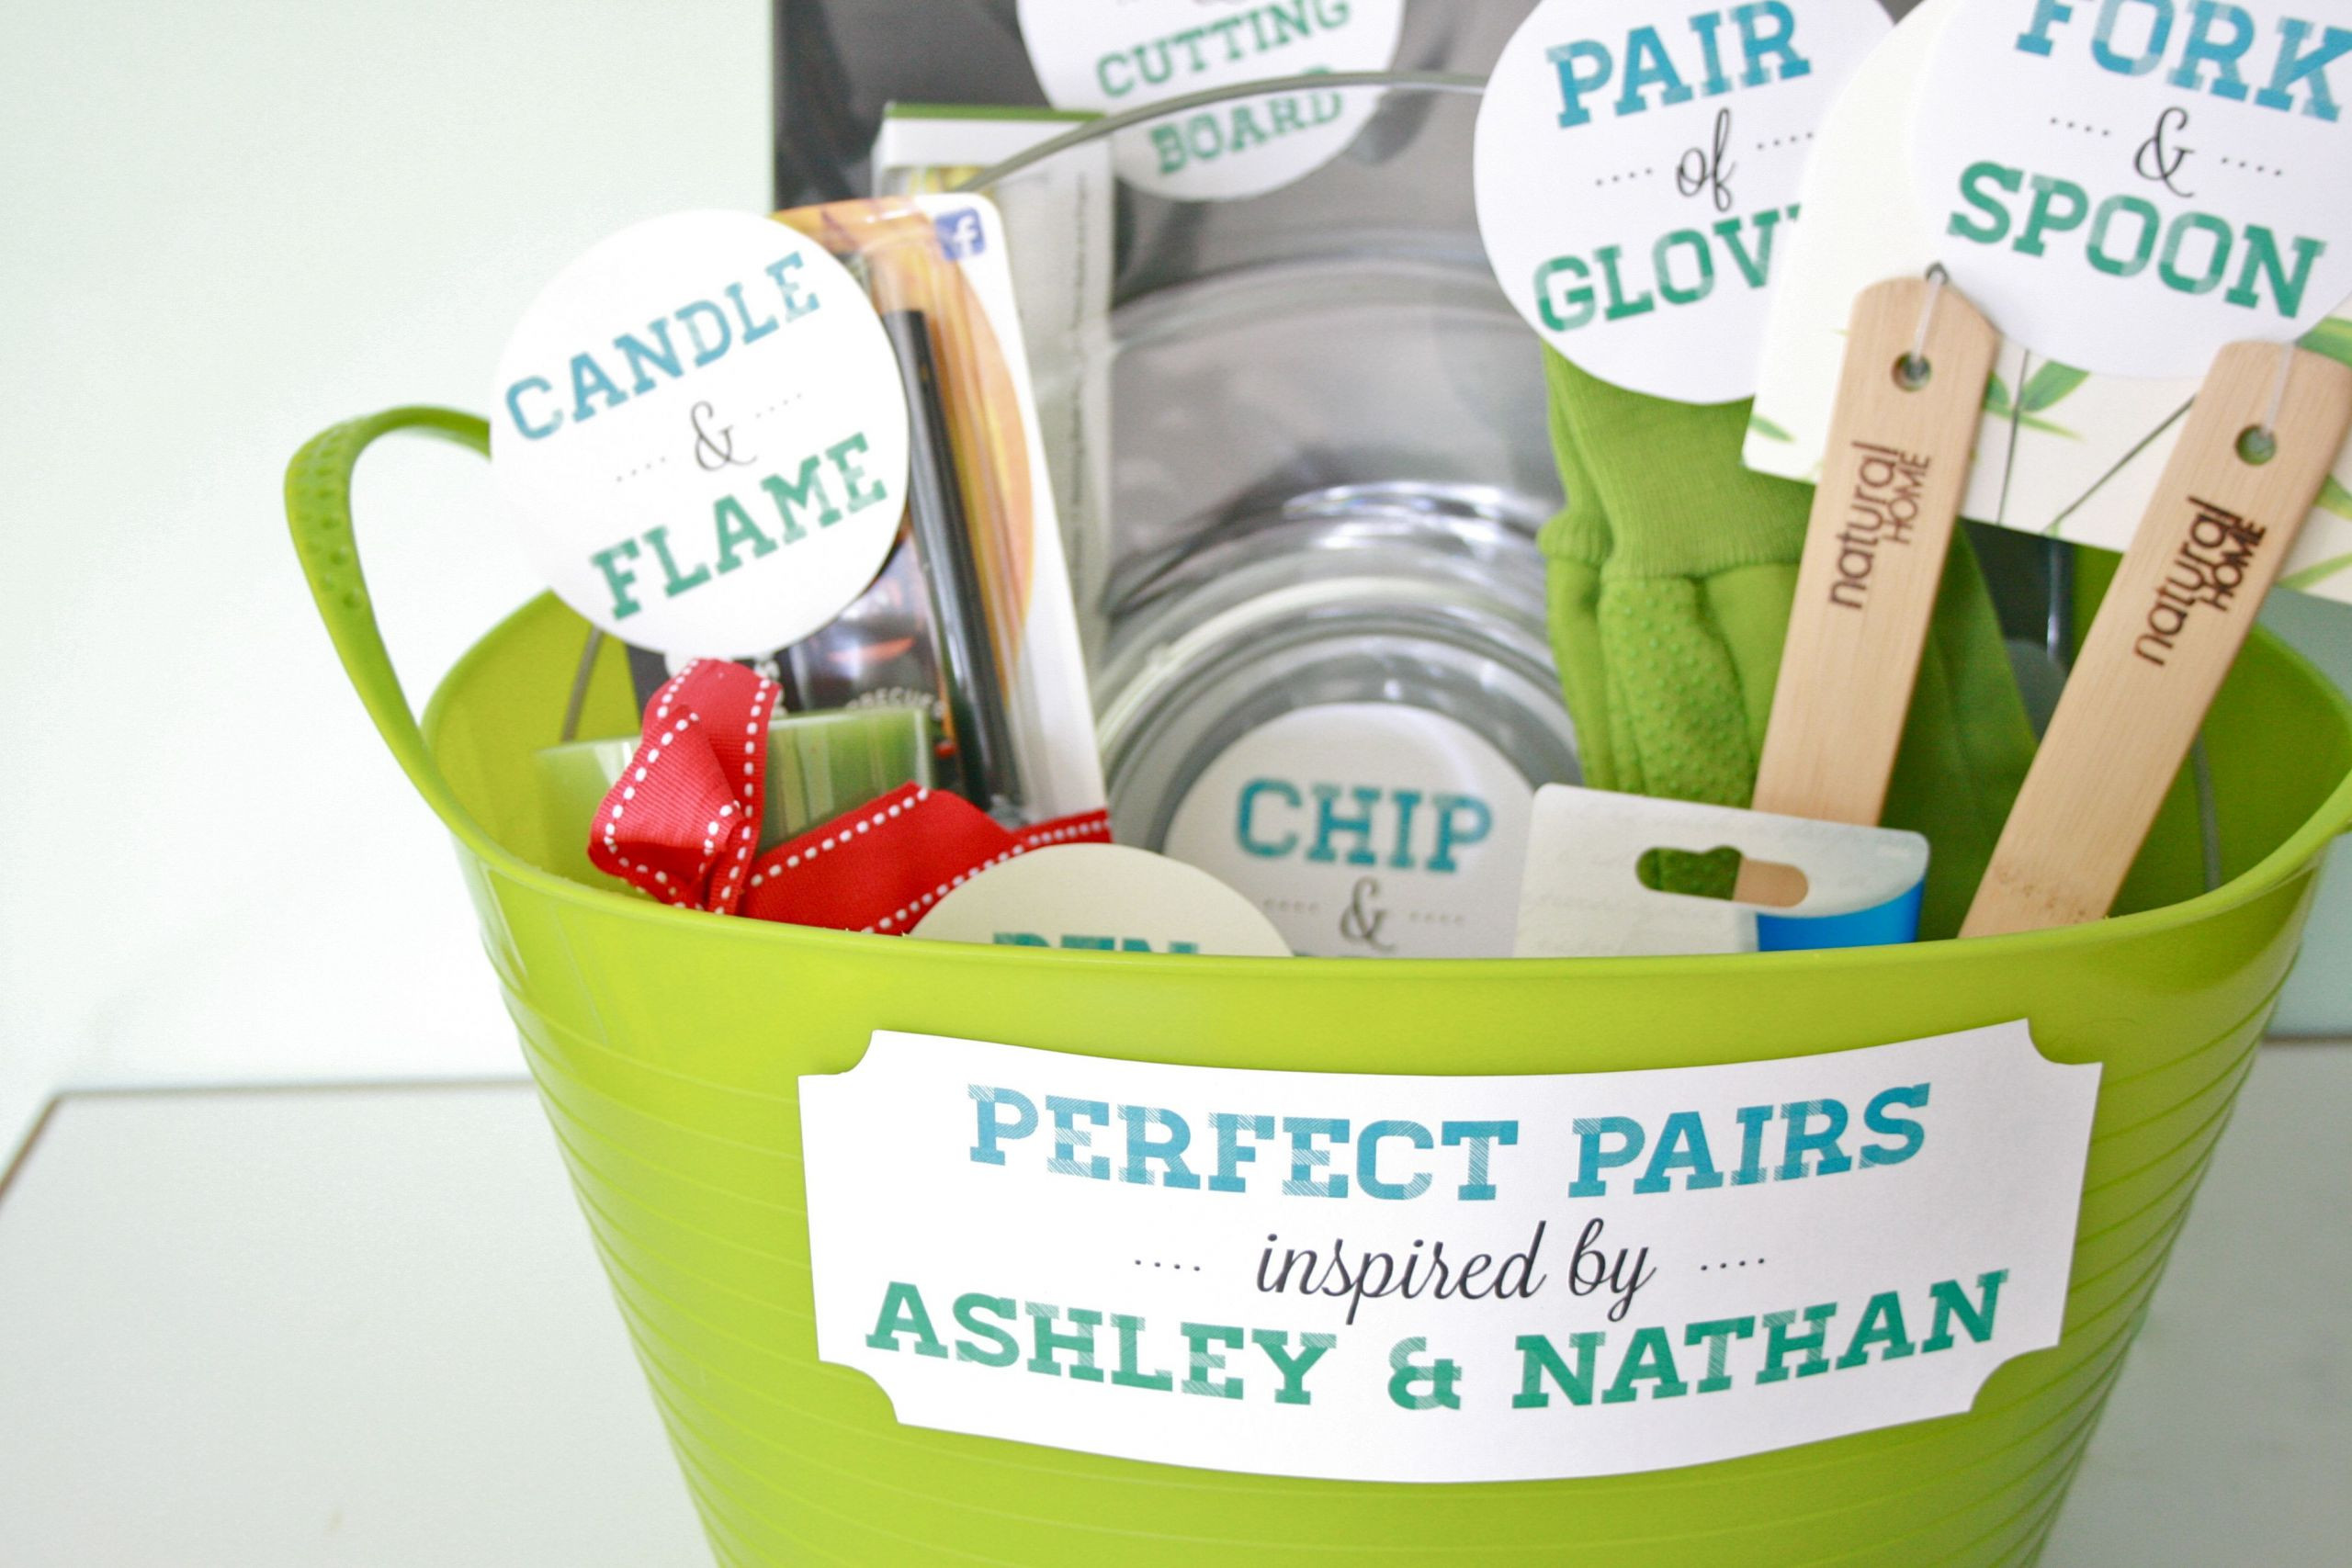 Gift Ideas For Couples Shower
 The top 20 Ideas About Couple Shower Gift Ideas Home